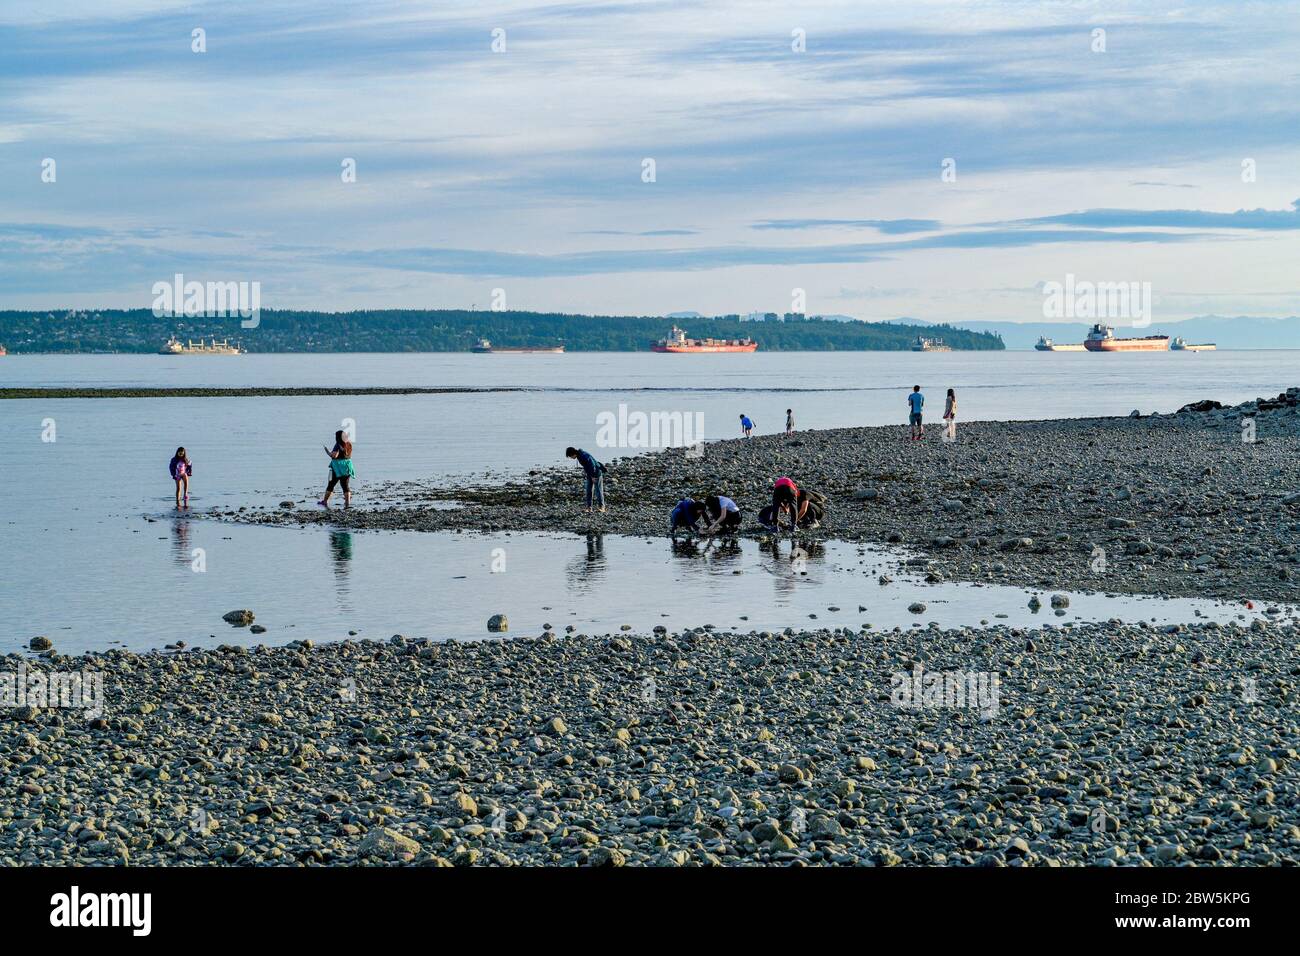 People enjoying warm Spring day at the beach, Ambleside Park, West Vancouver, British Columbia, Canada Stock Photo